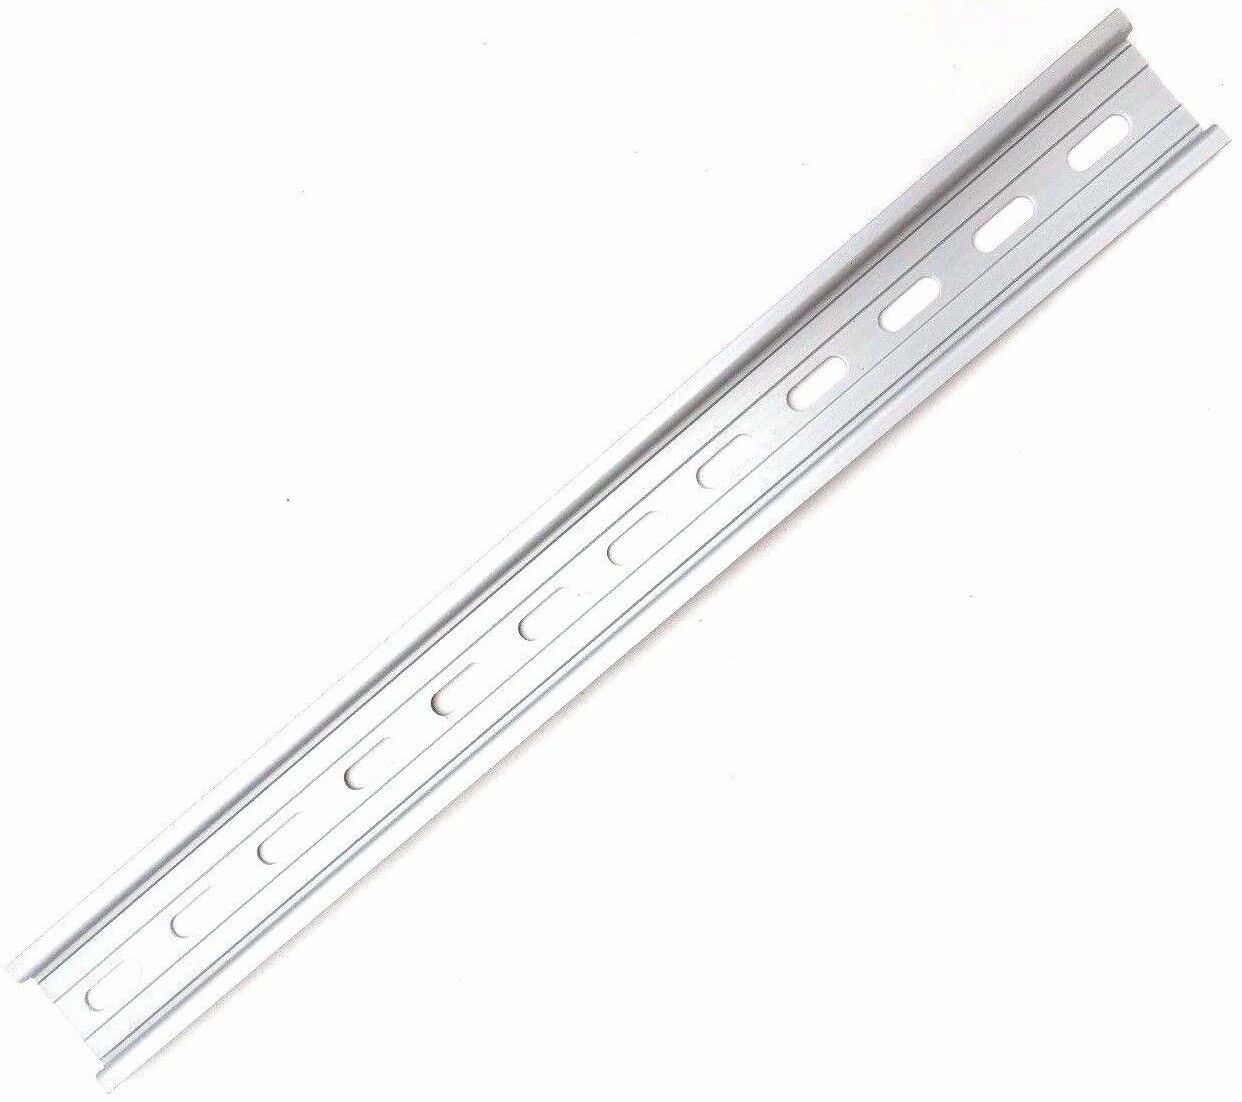 1 Piece Din Rail Slotted Aluminum Rohs 12" Inches Long 35mm 7.5mm T&g